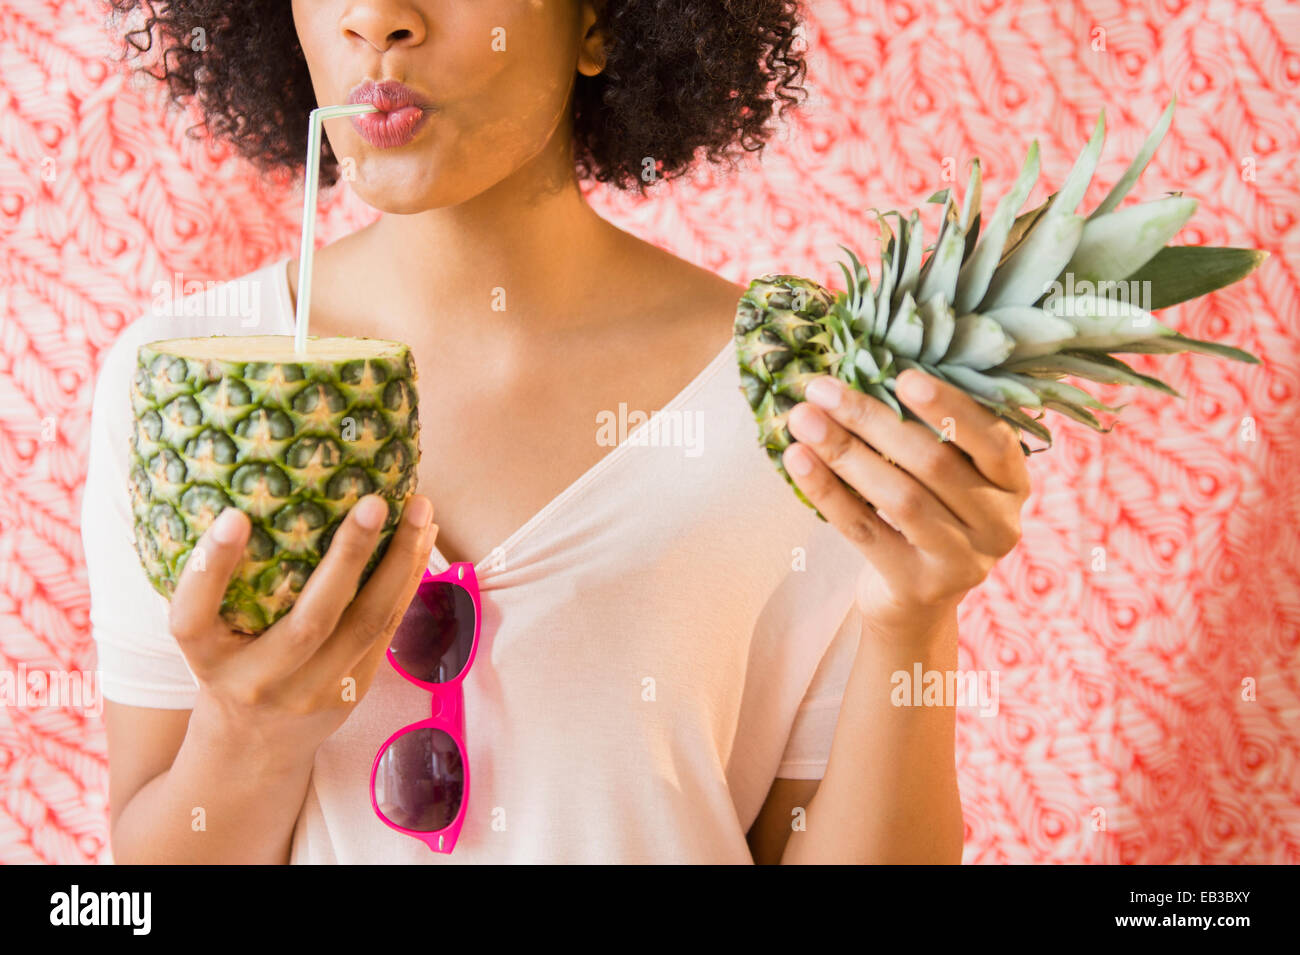 Woman drinking juice from fresh pineapple Stock Photo